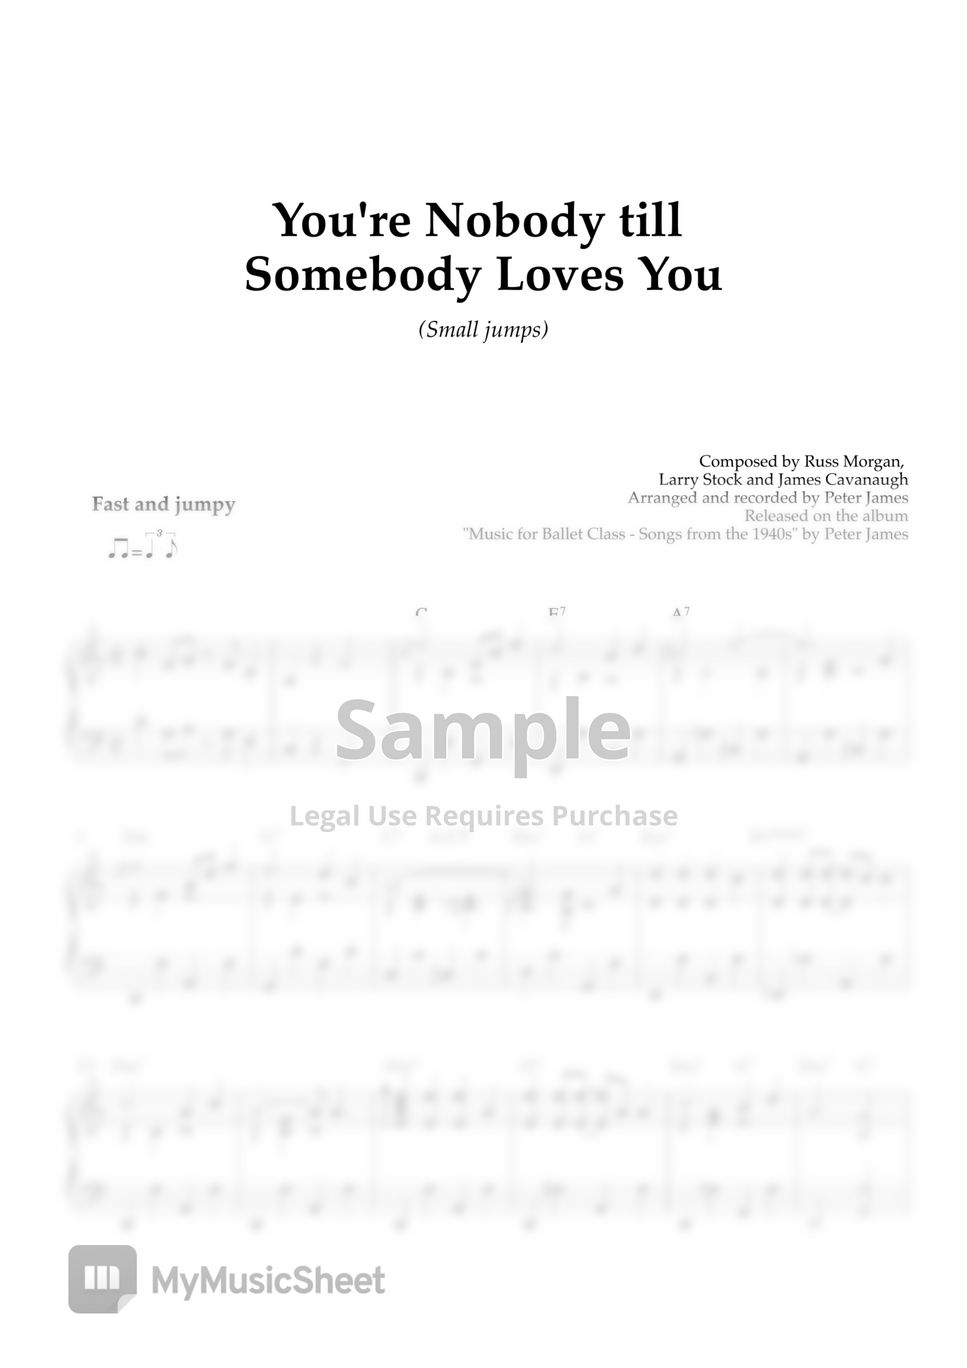 Russ Morgan, Larry Stock, James Cavanaugh - You're Nobody till Somebody Loves You by Peter James